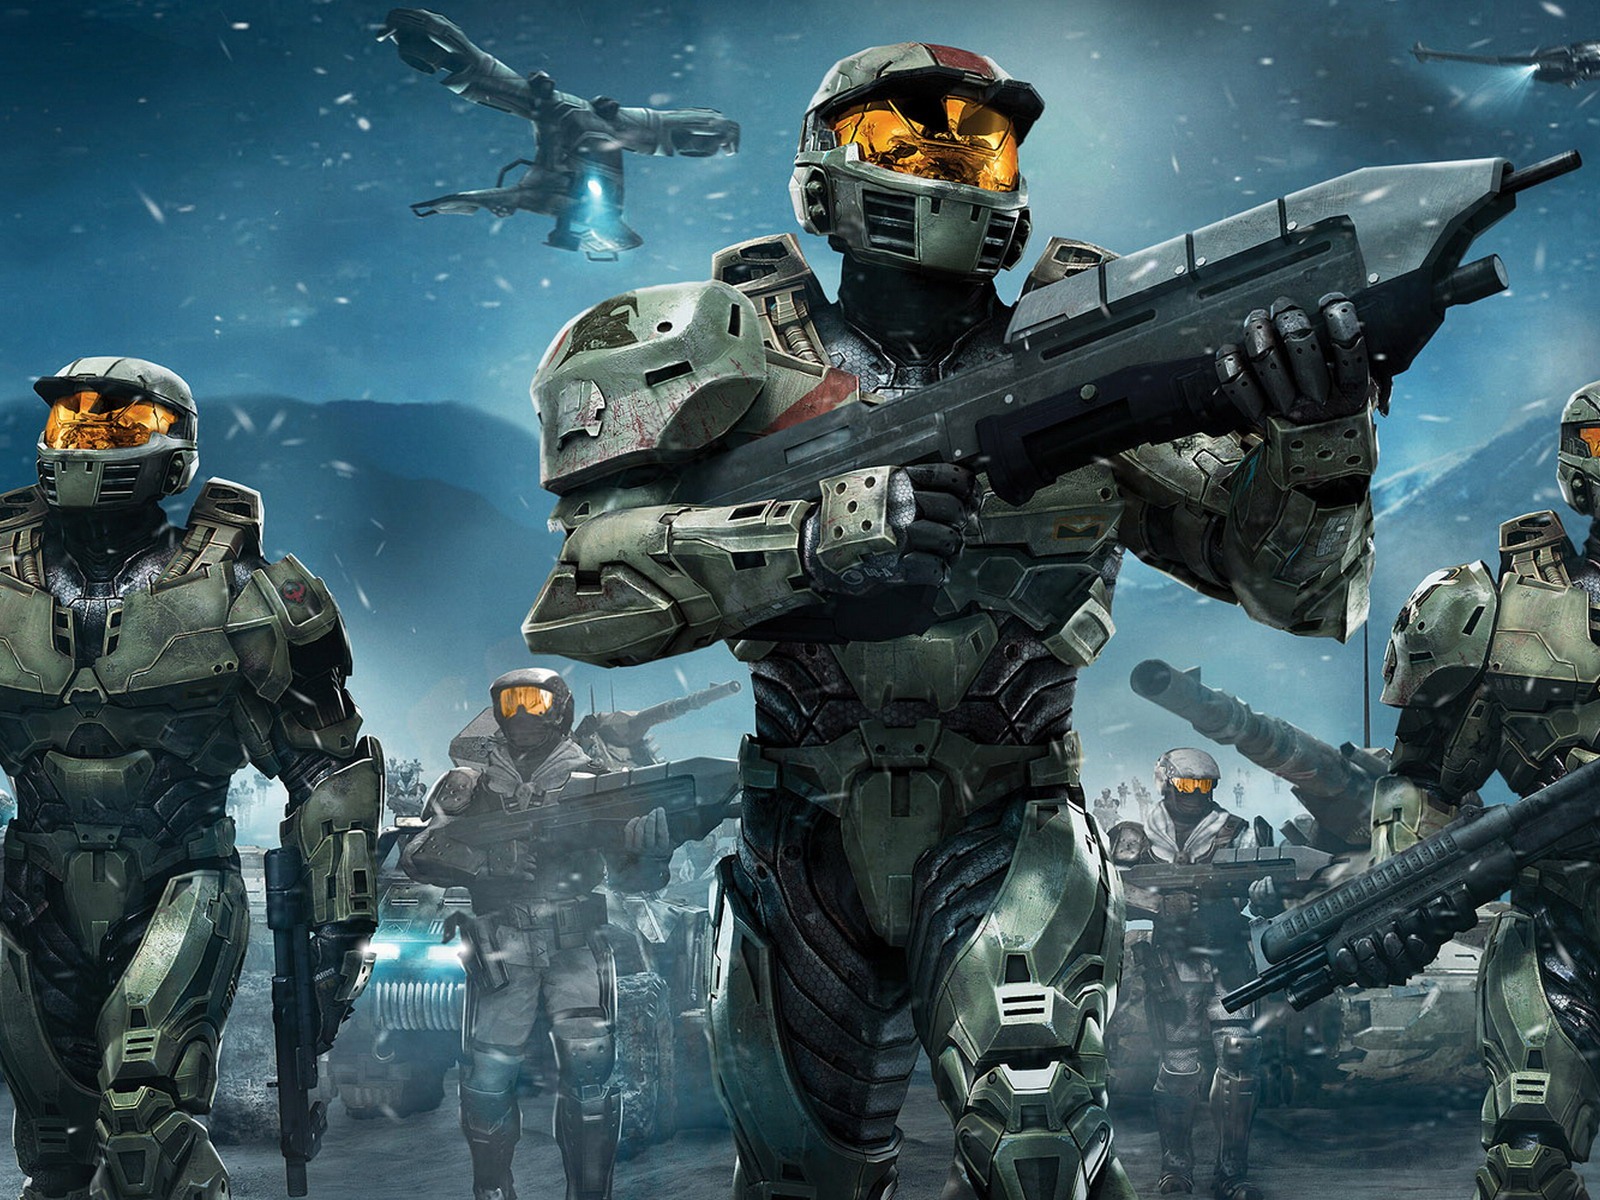 Halo game HD wallpapers #25 - 1600x1200